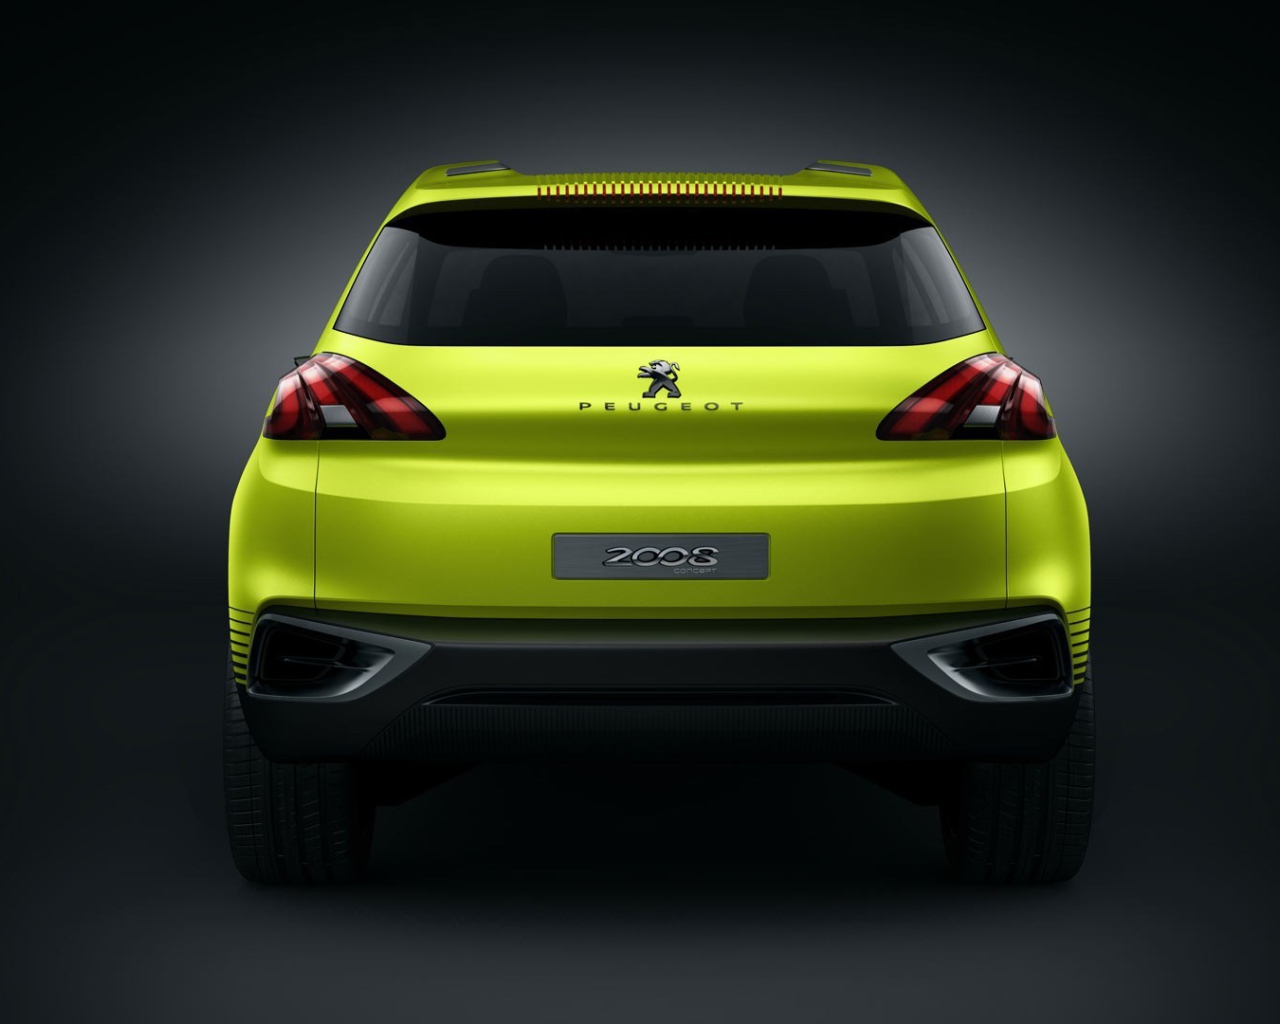 Rear view of the yellow Peugeot 2008